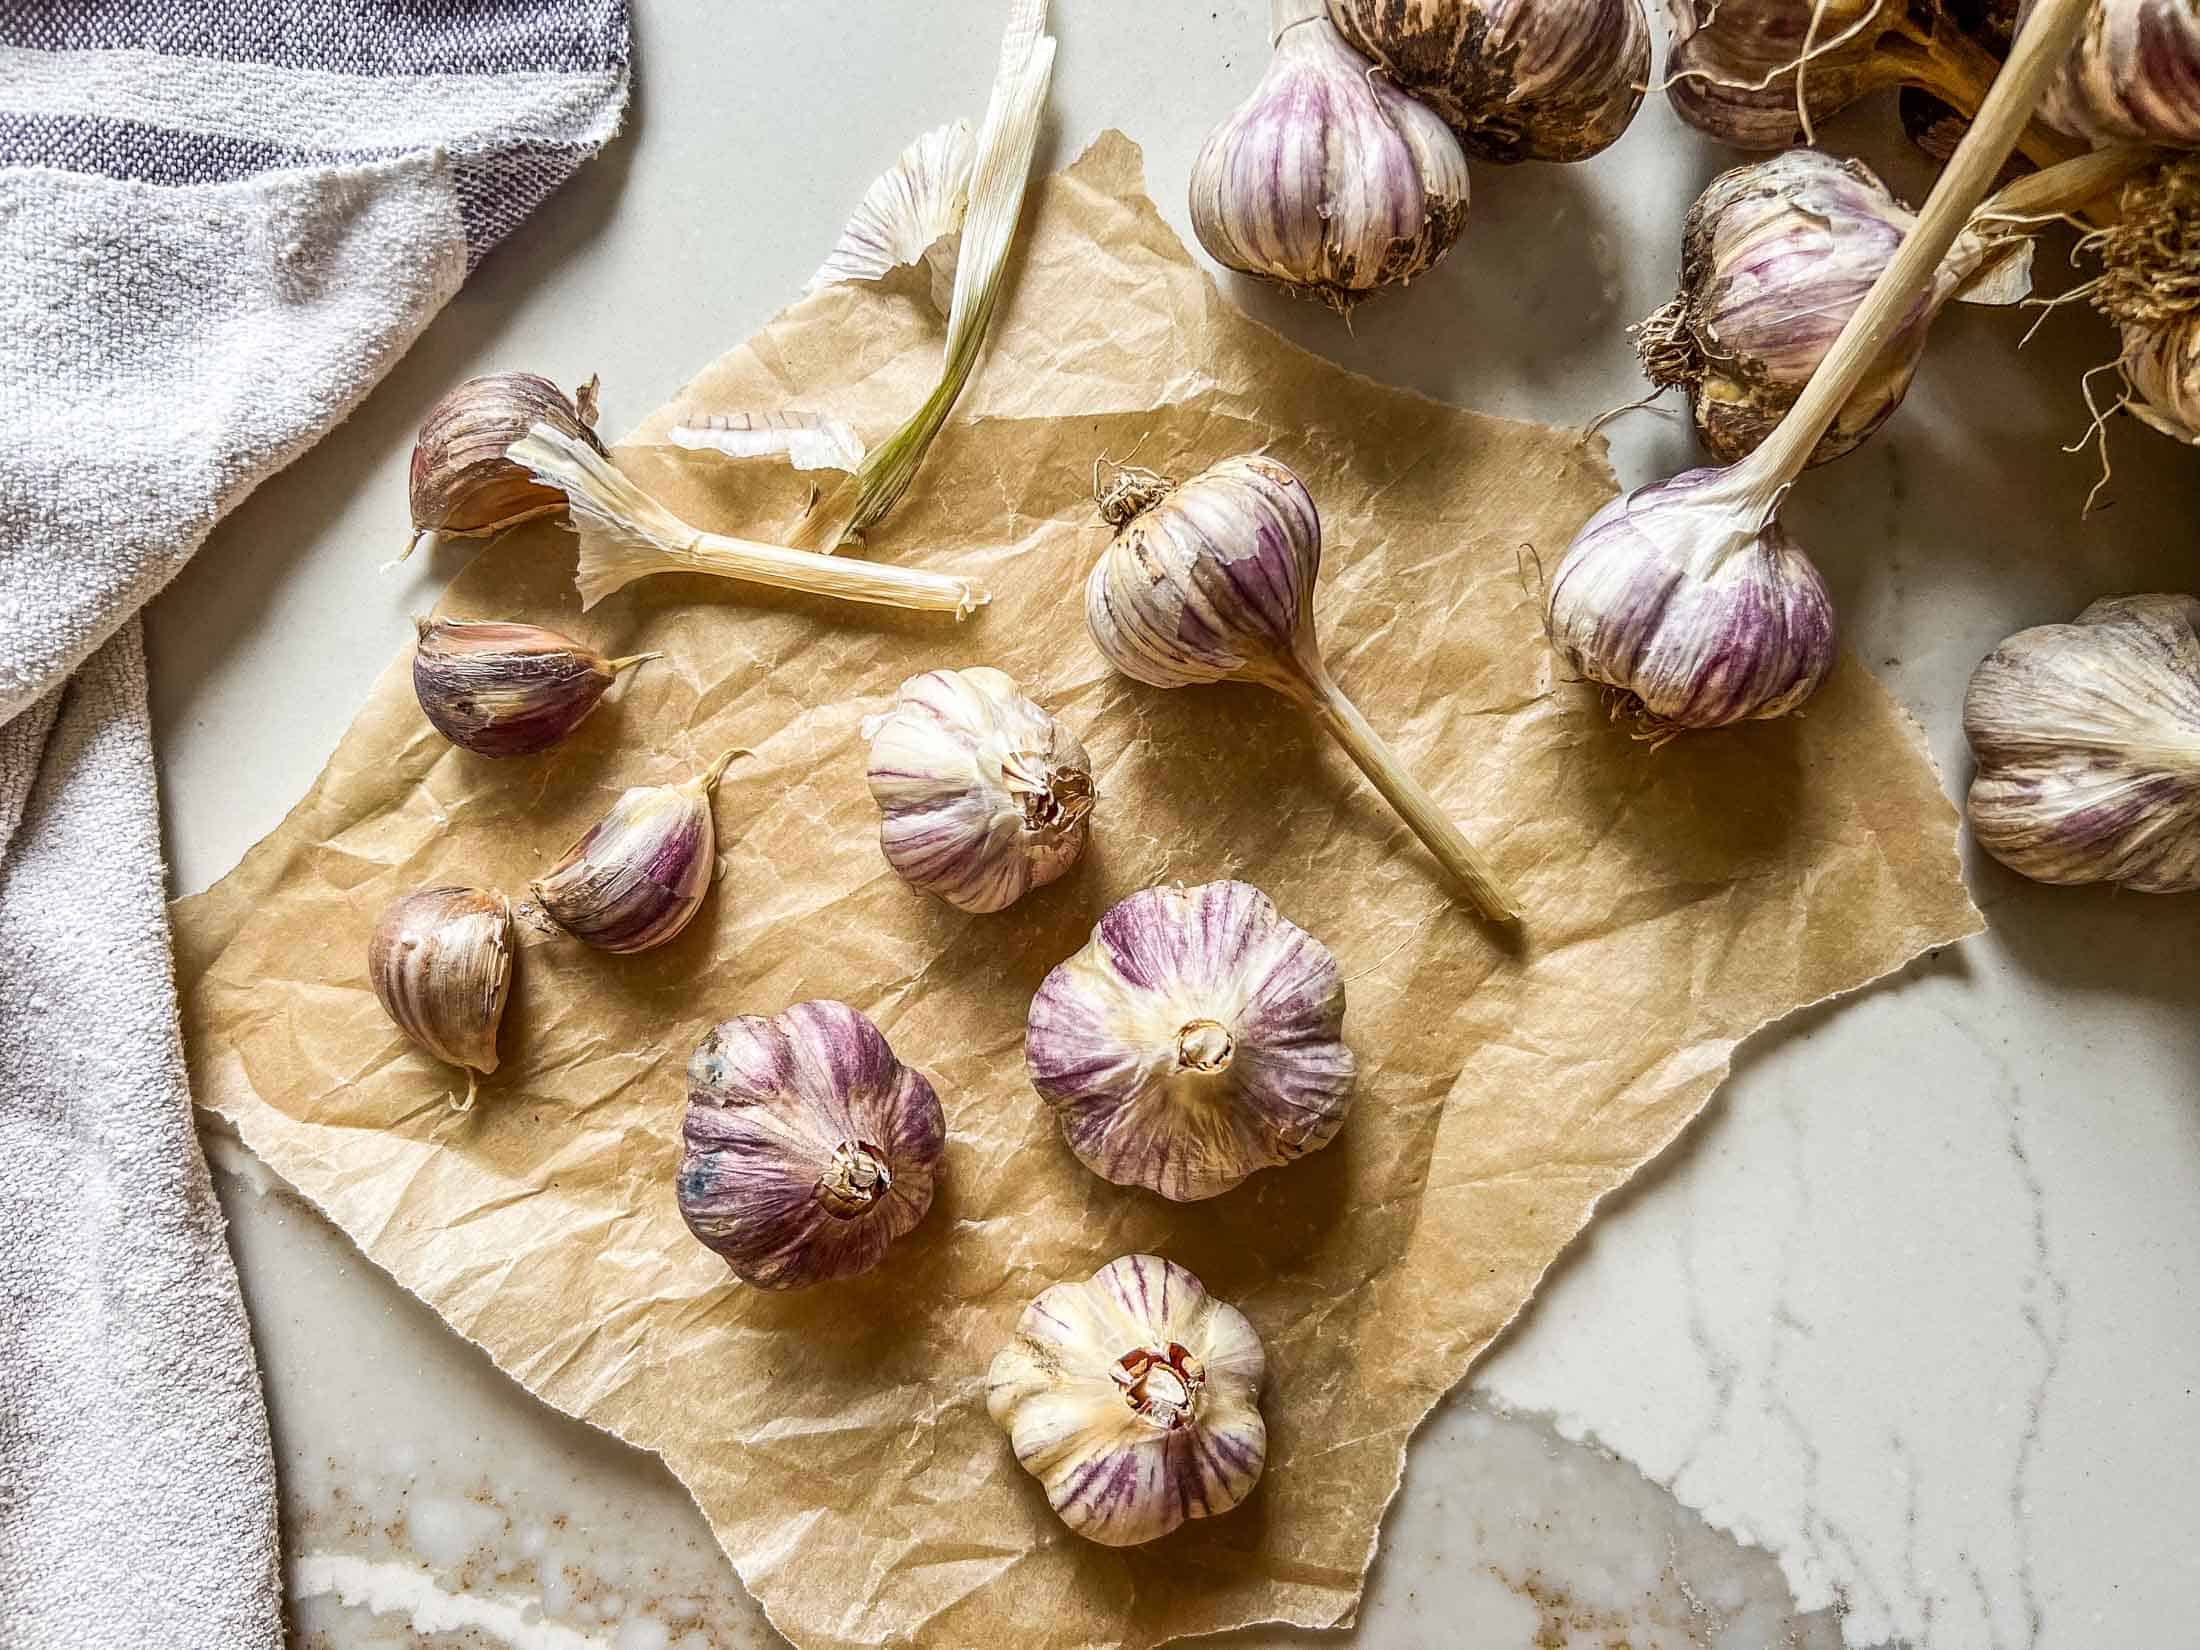 Purple Russian hardneck garlic heads and cloves on a piece of parchment.